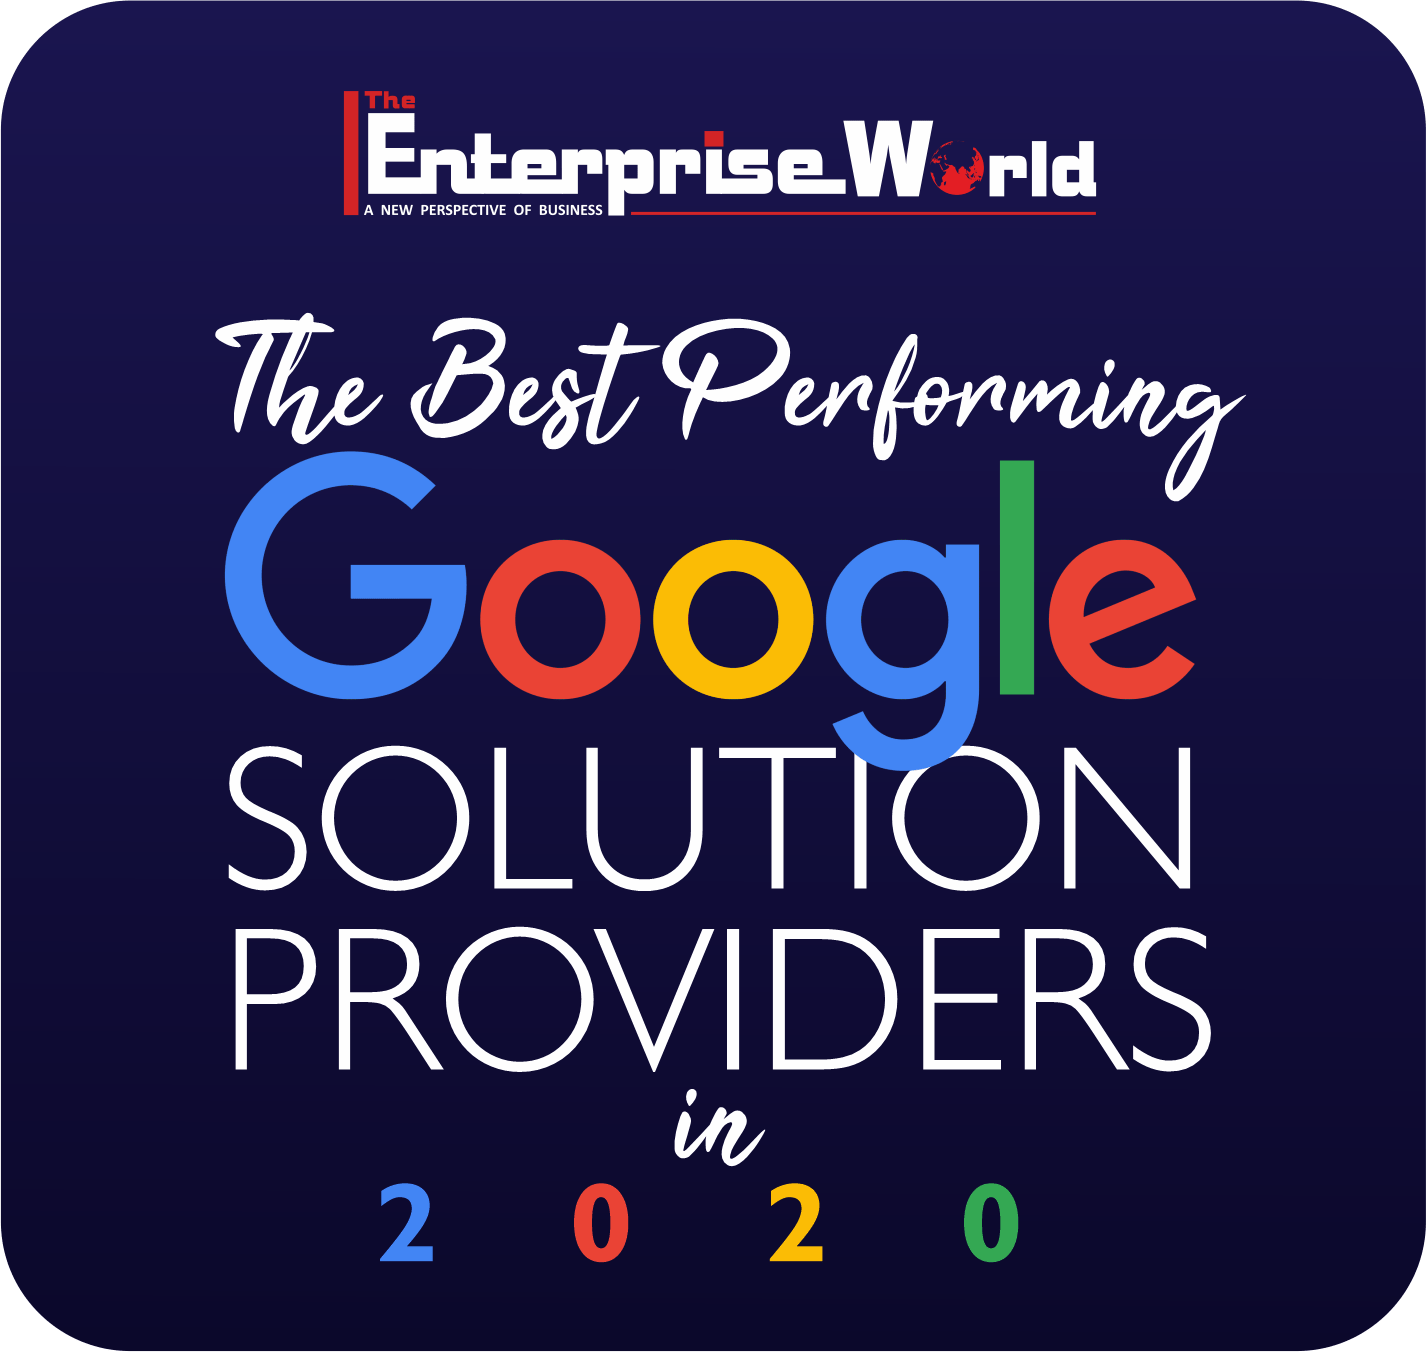 Image recognizing Cameyo's award for Best Performing Google Solution Providers of 2020